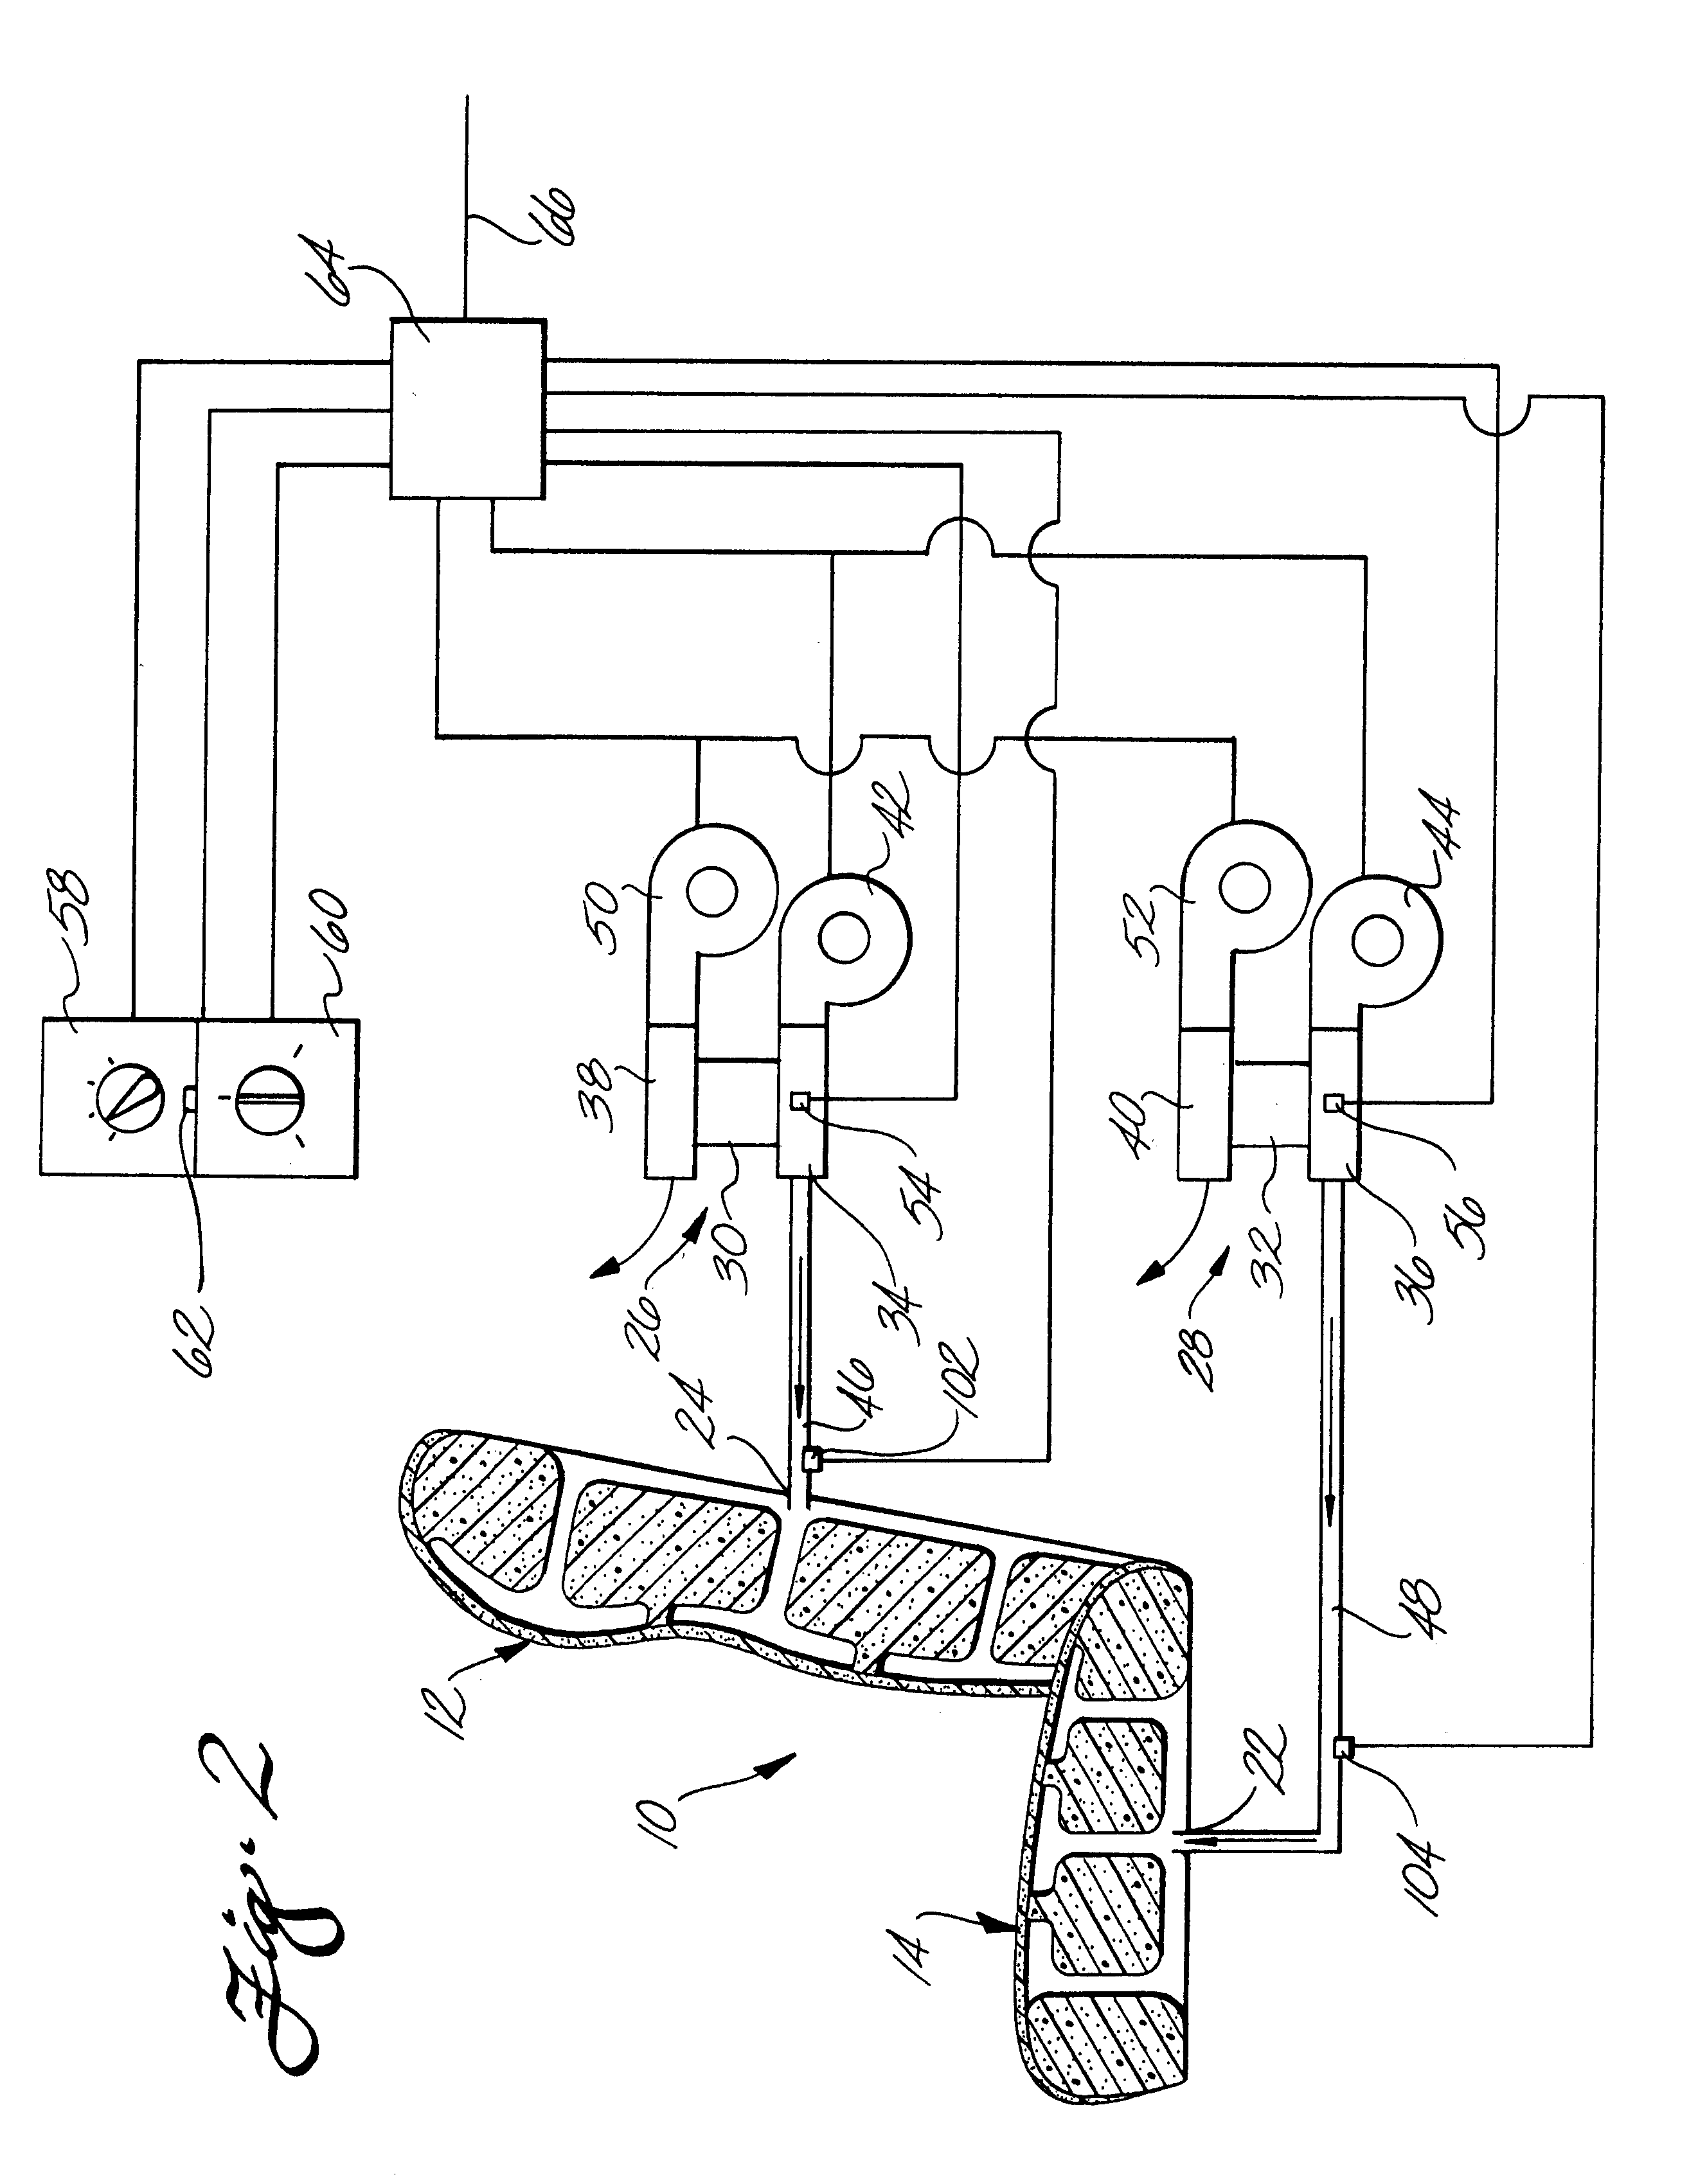 Variable temperature seat climate control system